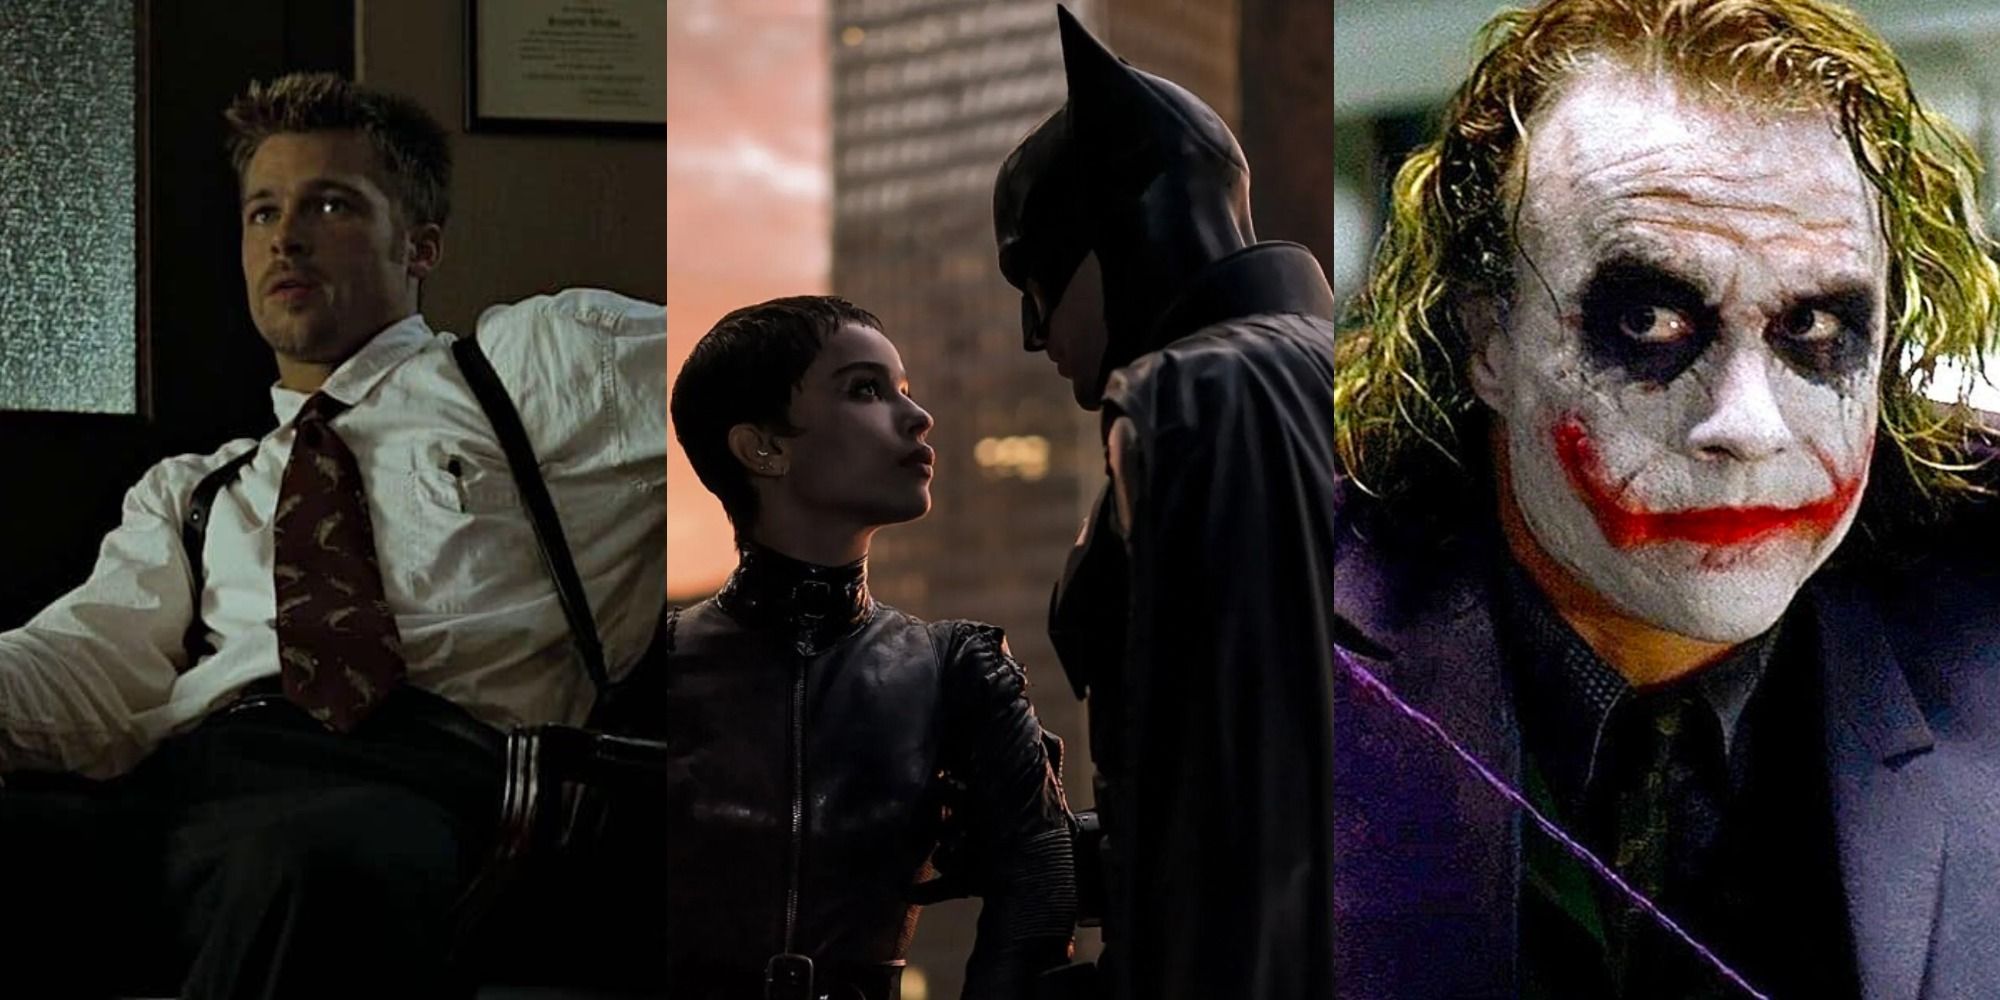 The Batman: 15 Unpopular Opinions About The New Movie, According To Reddit